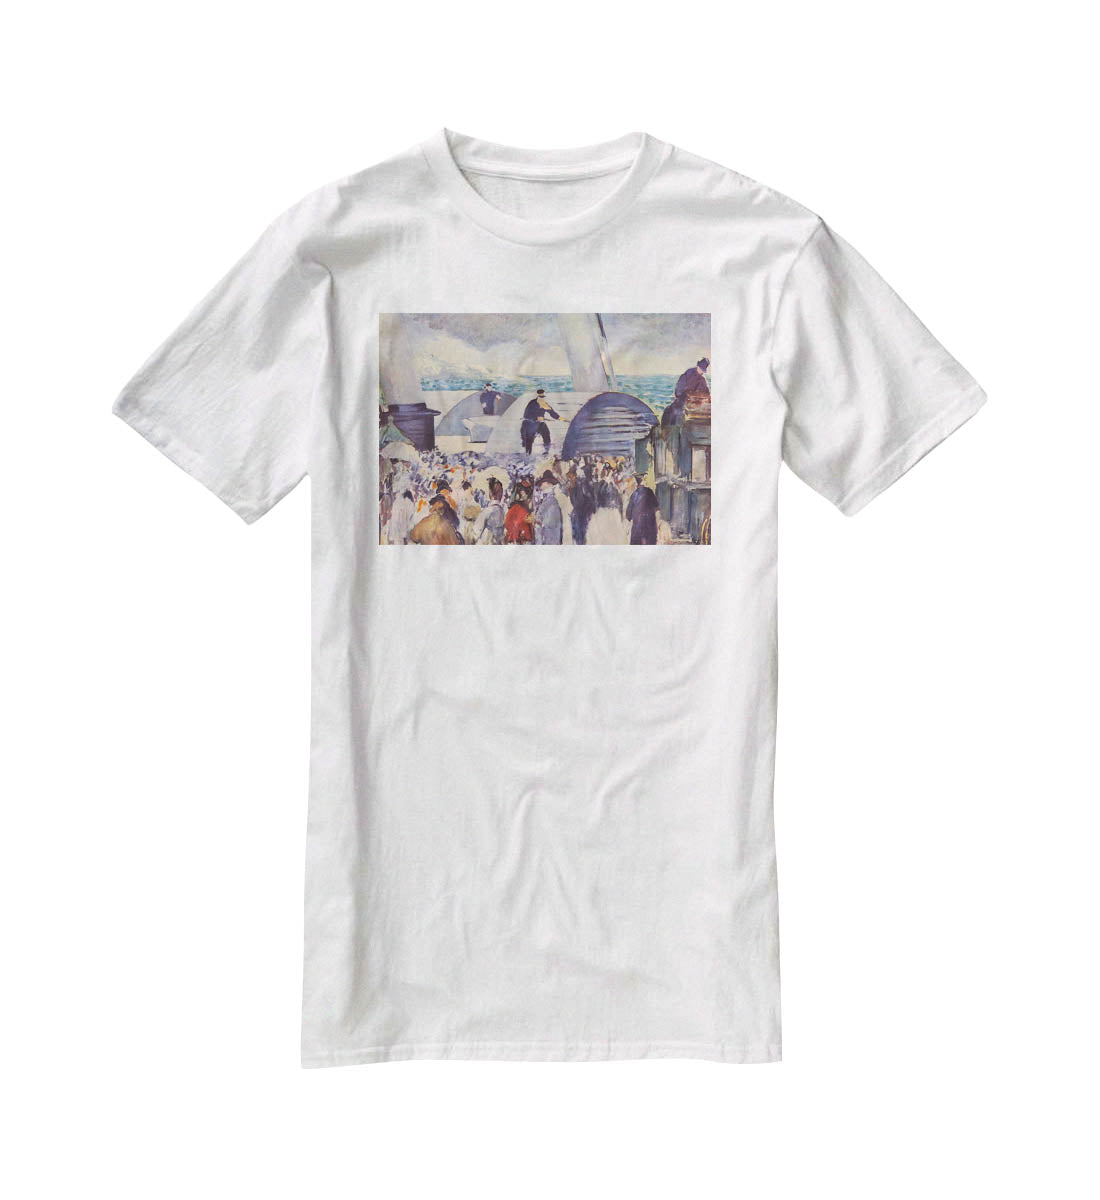 Embarkation of the Folkestone by Manet T-Shirt - Canvas Art Rocks - 5